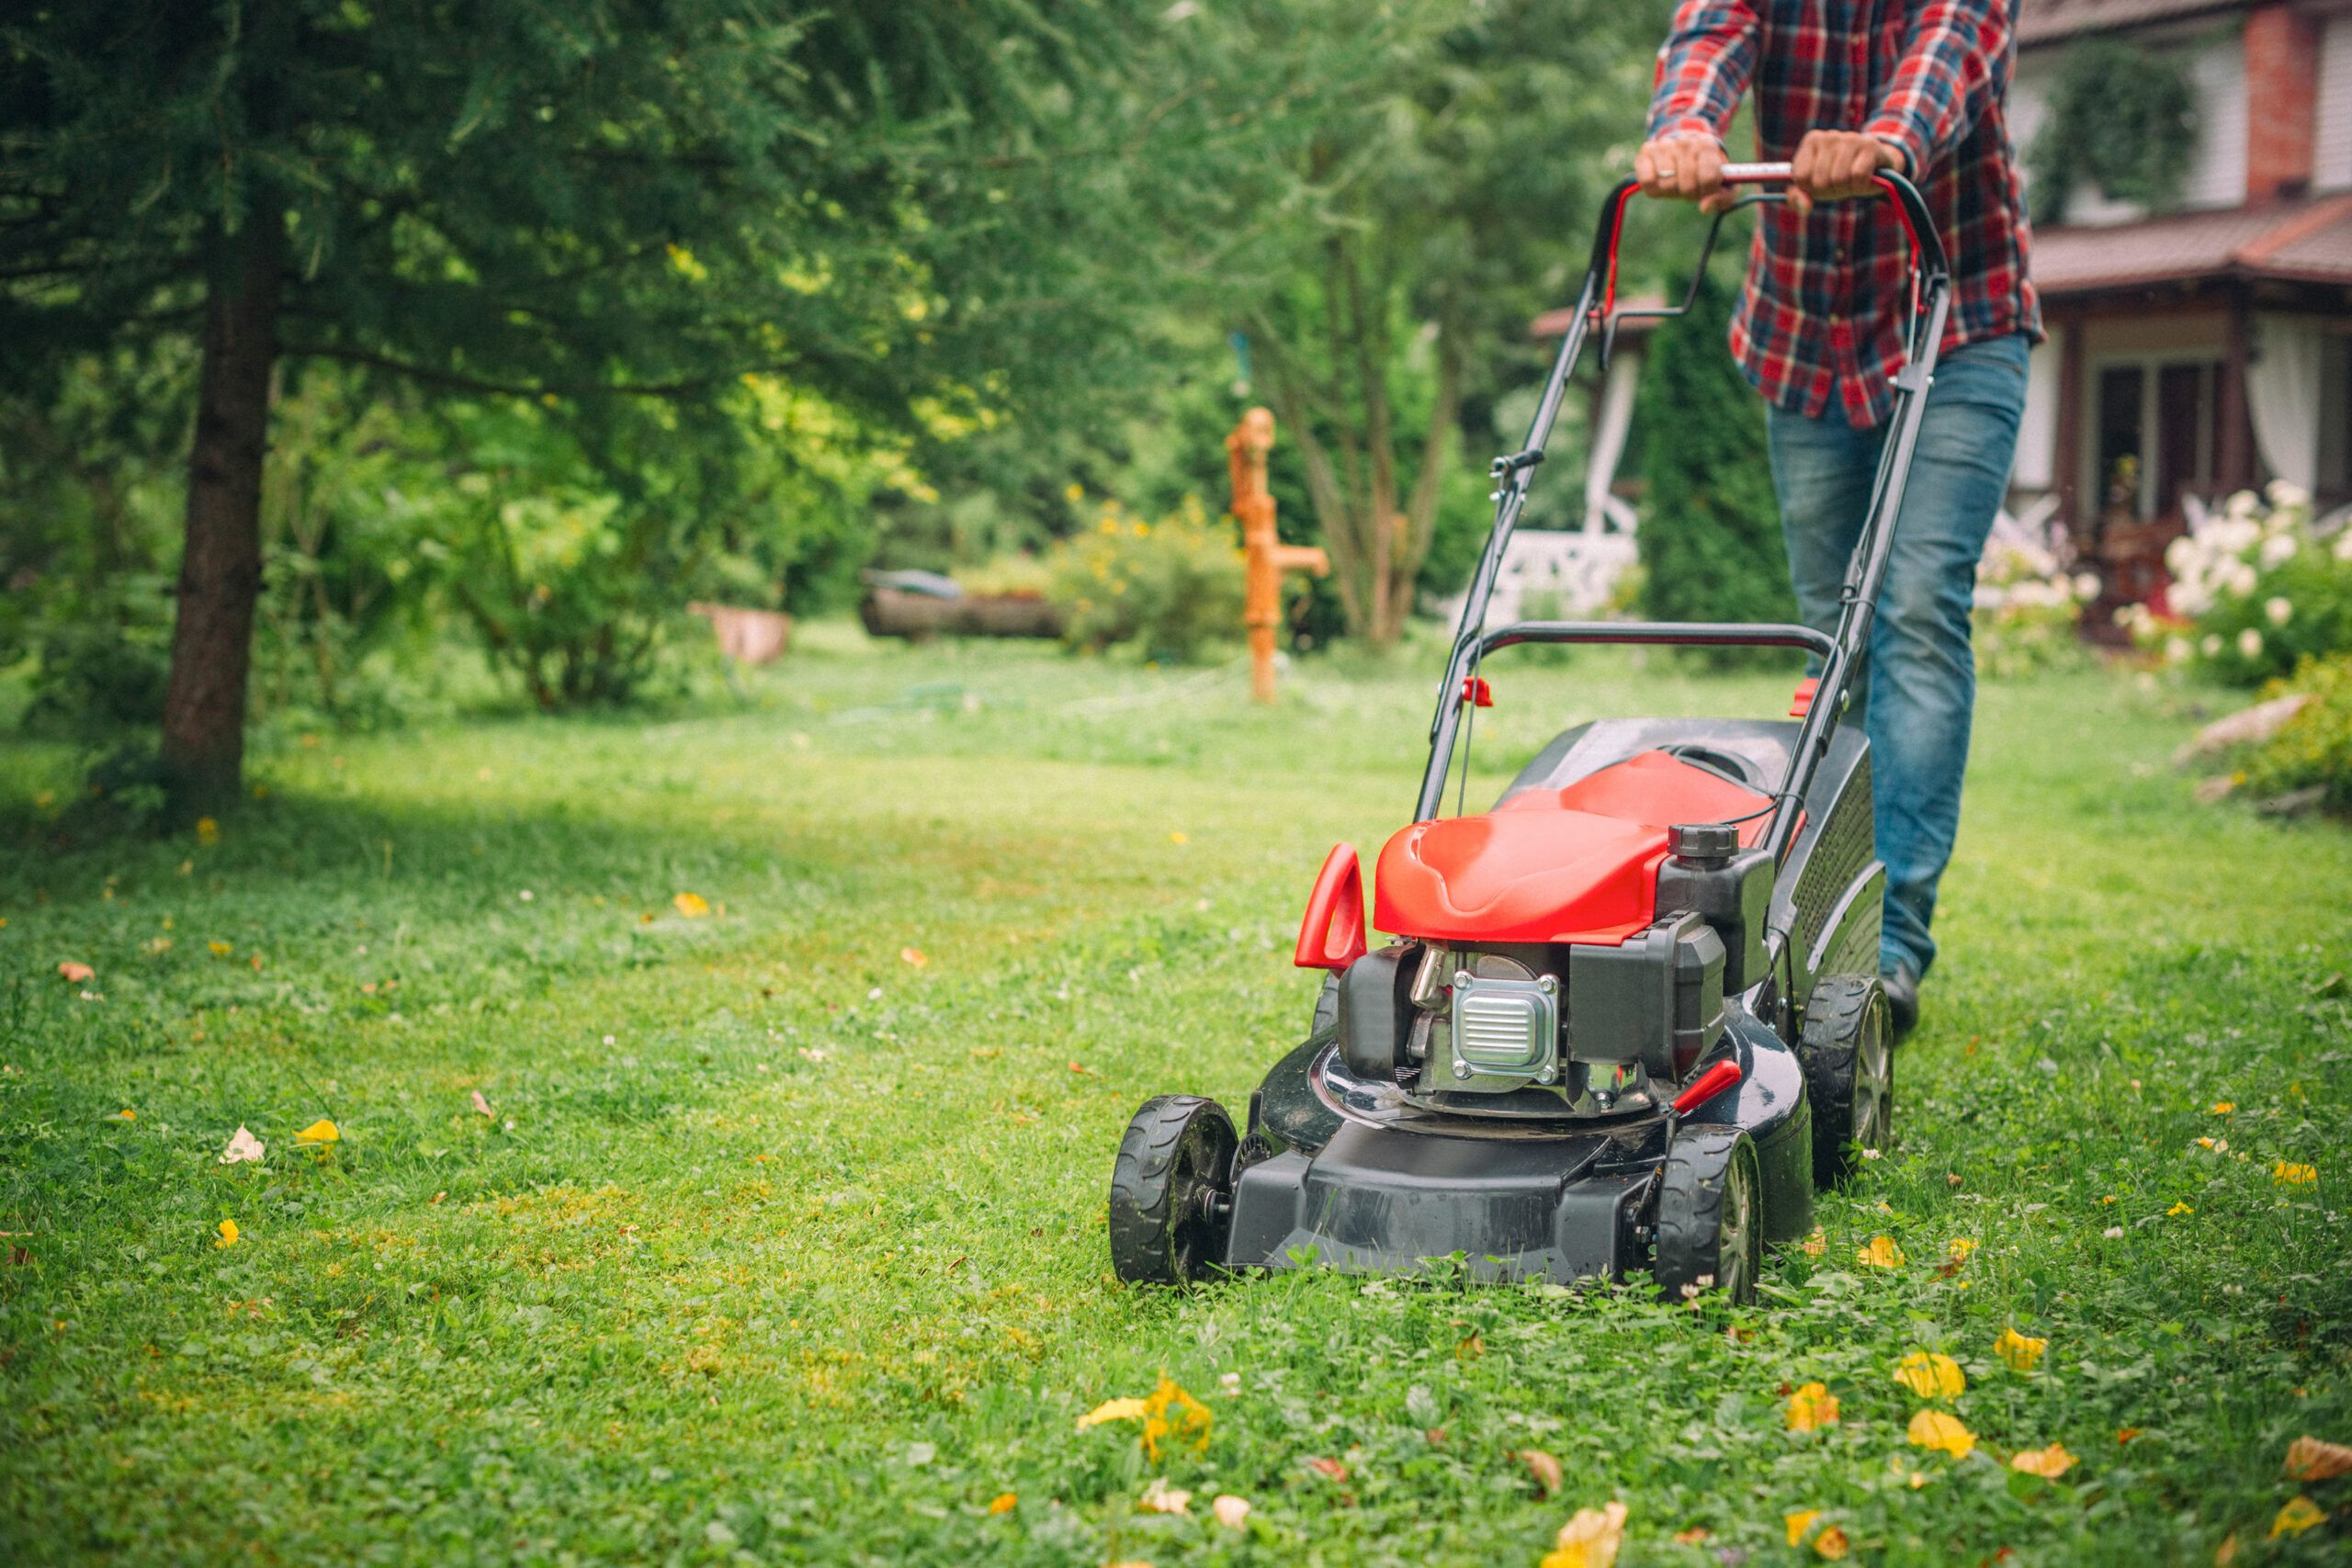 How to Winterize Your Electric Lawn Mower in 7 Easy Steps.